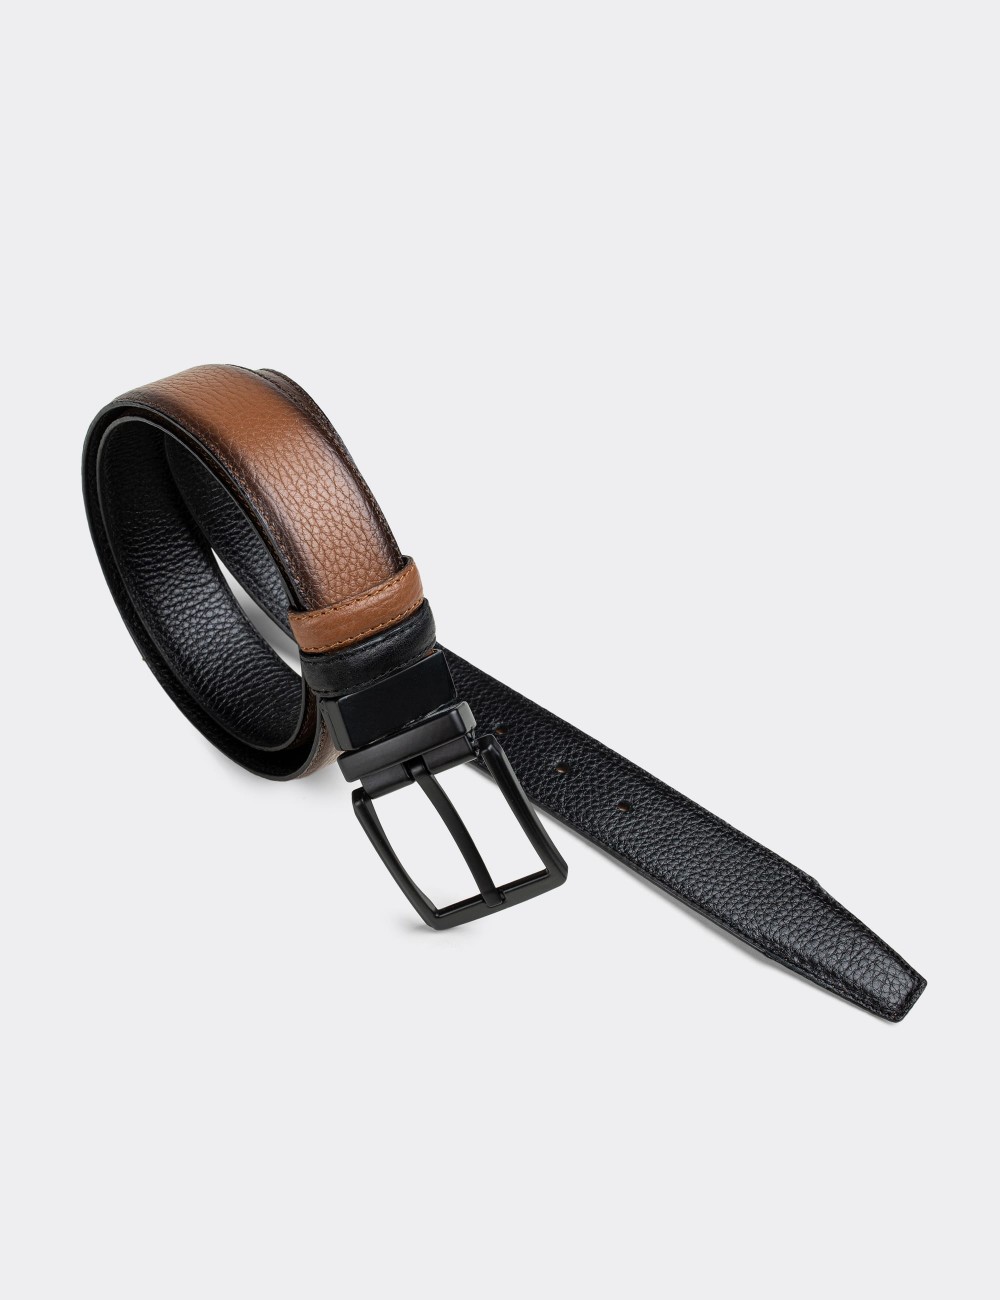  Leather Tan and Black Double Sided Men's Belt - K0408MTBAW01